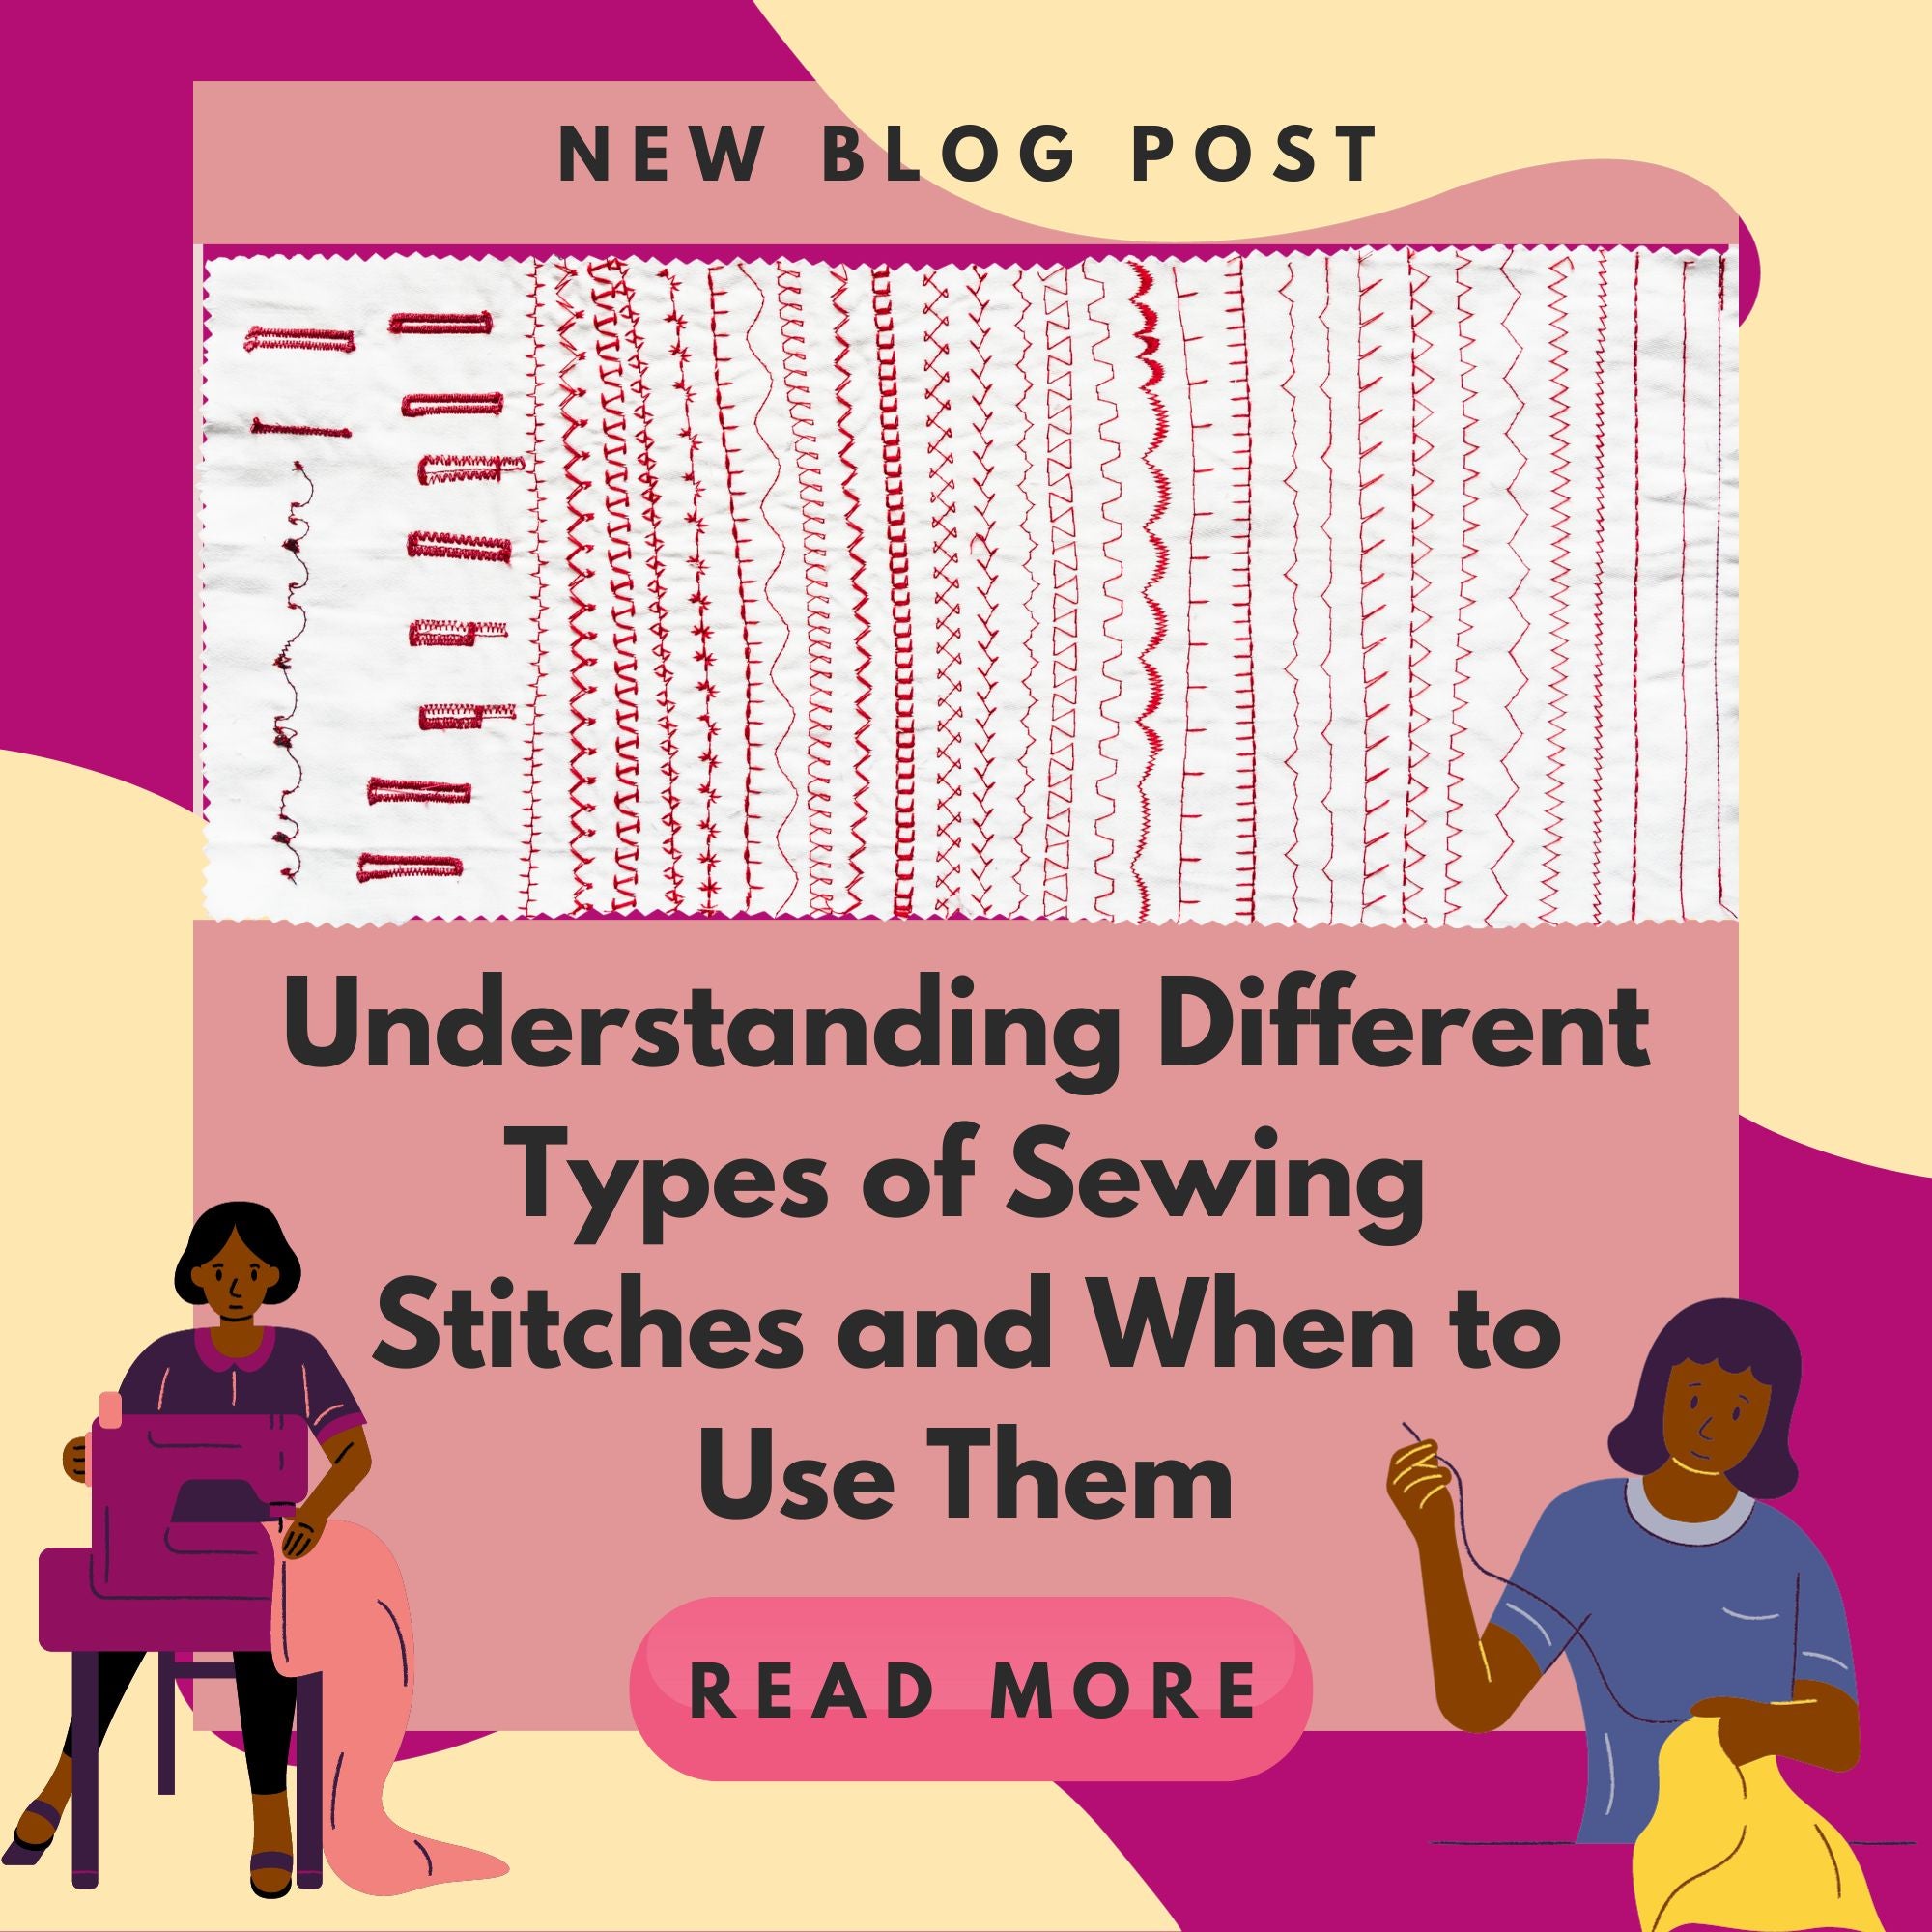 Understanding Different Types of Sewing Stitches and When to Use Them